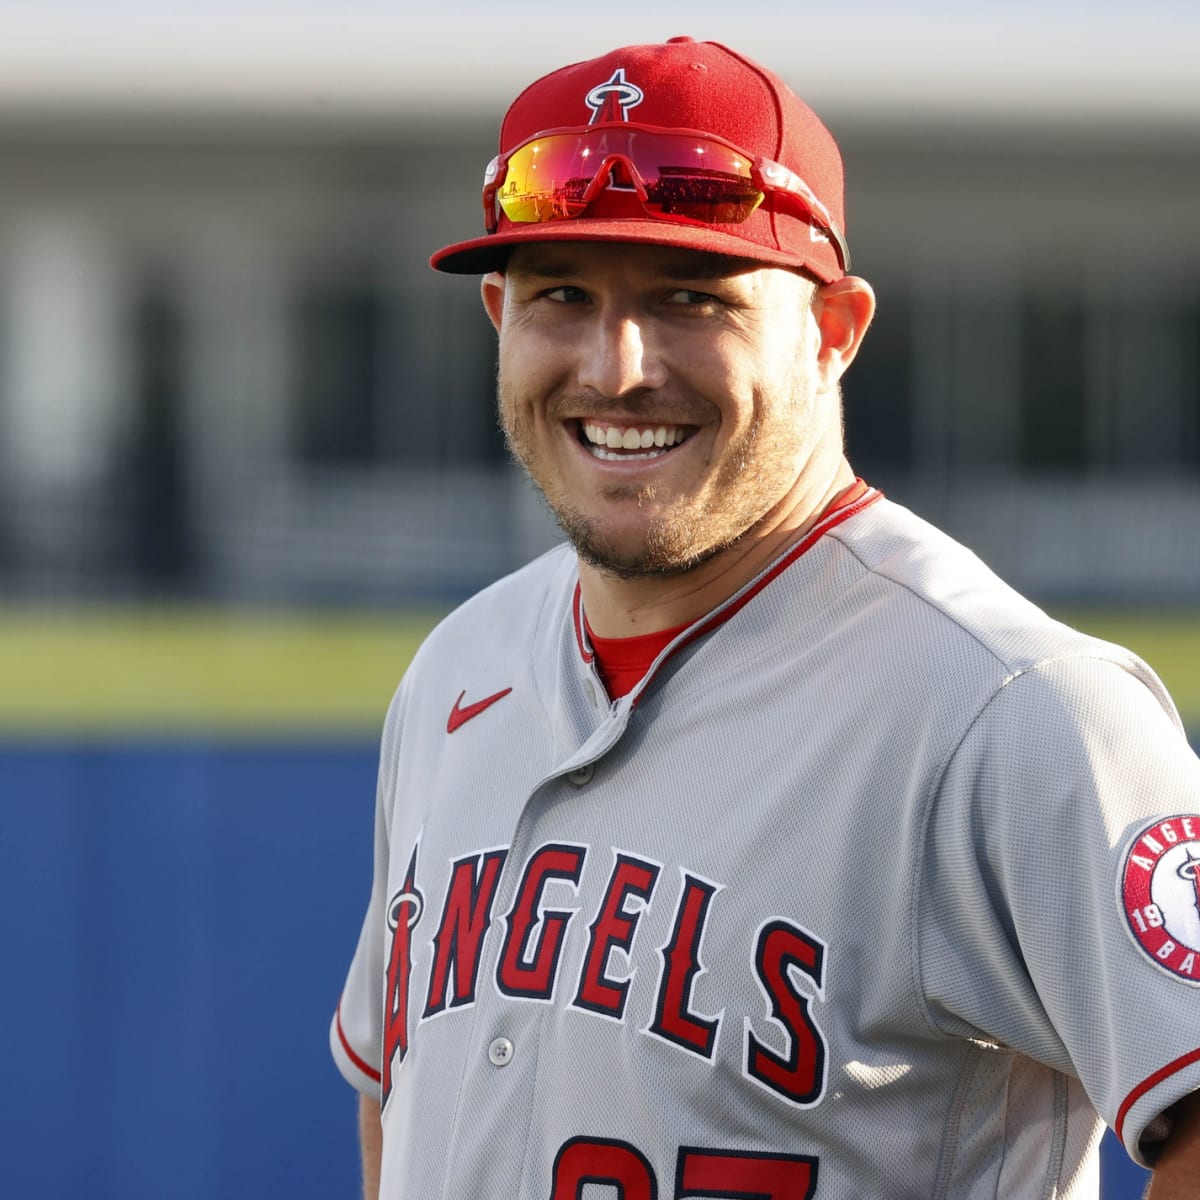 LA Angels star Mike Trout involved in crash in California - 6abc